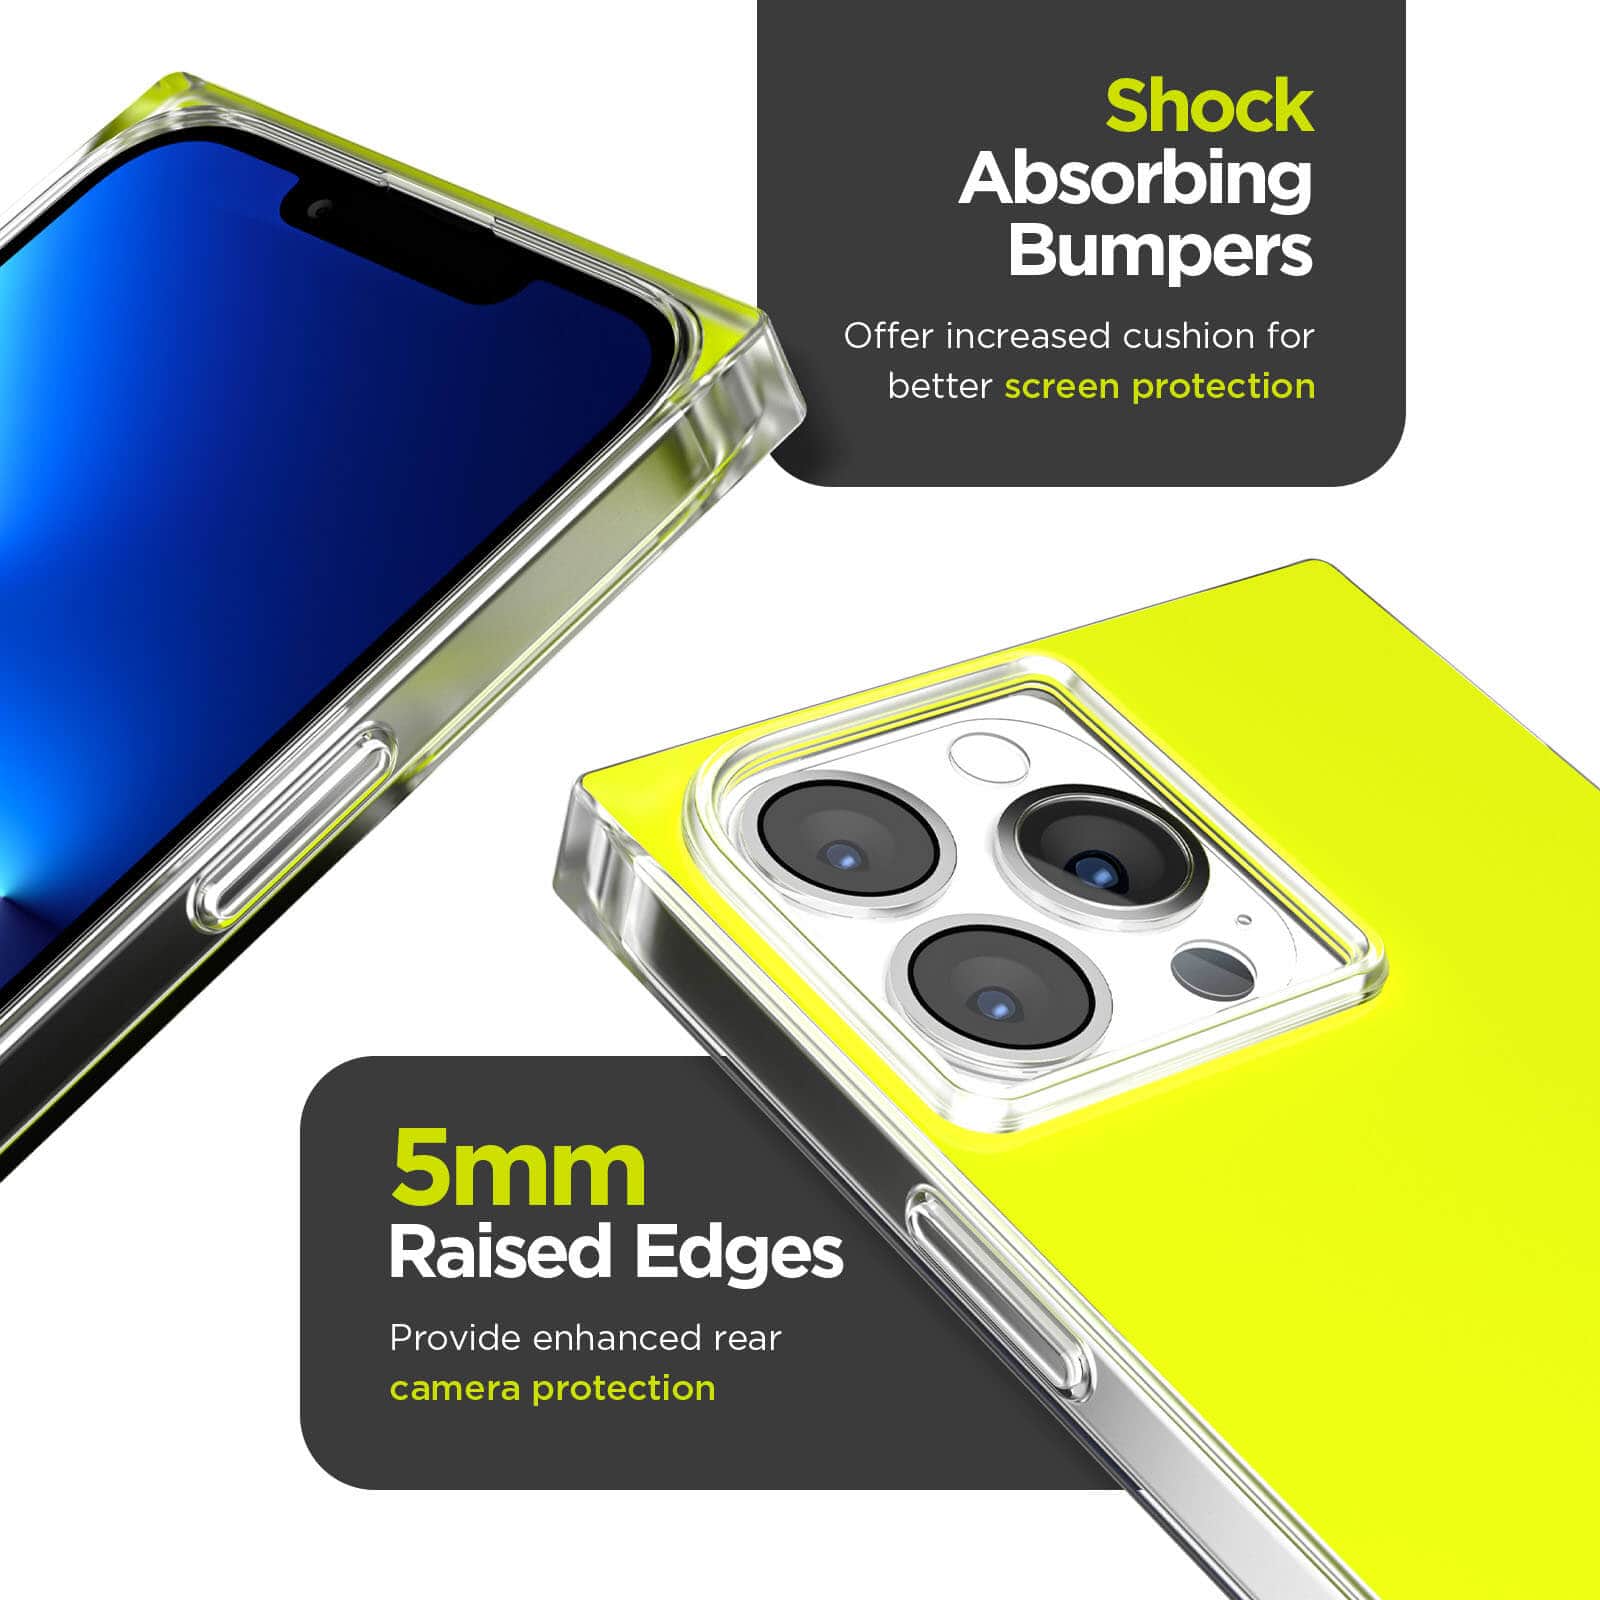 Shock absorbing bumpers offer increased cushion for better screen protection. 5mm raised edges provided enhanced rear camera protection. color::Neon Yellow